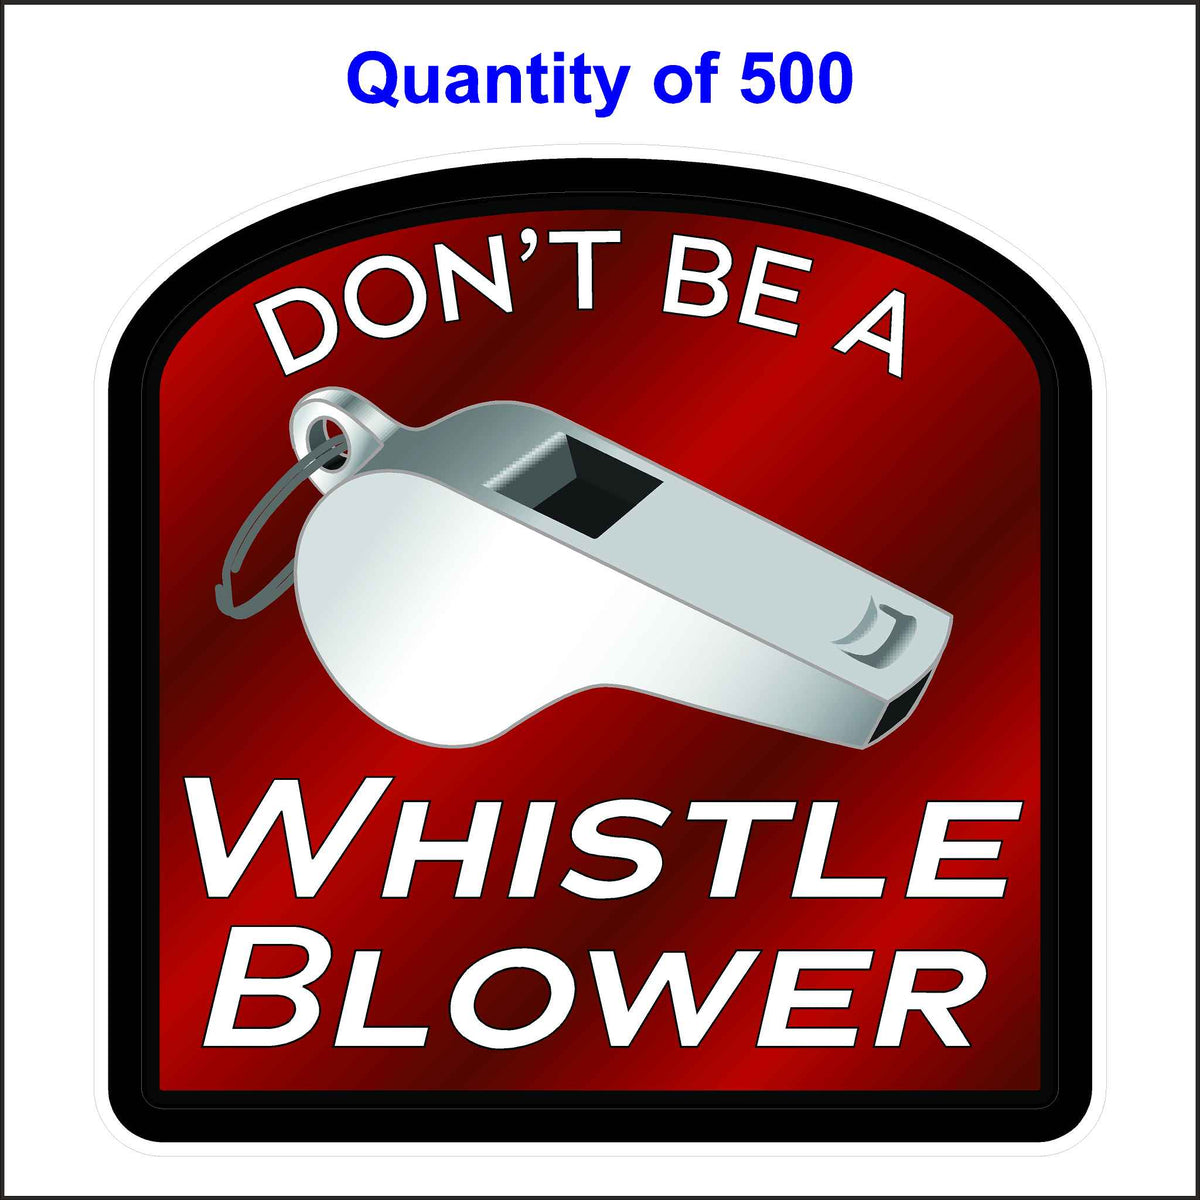 Don’t Be a Whistleblower Sticker. Red and Black With White Letters and a Silver Whistle. 500 Quantity.